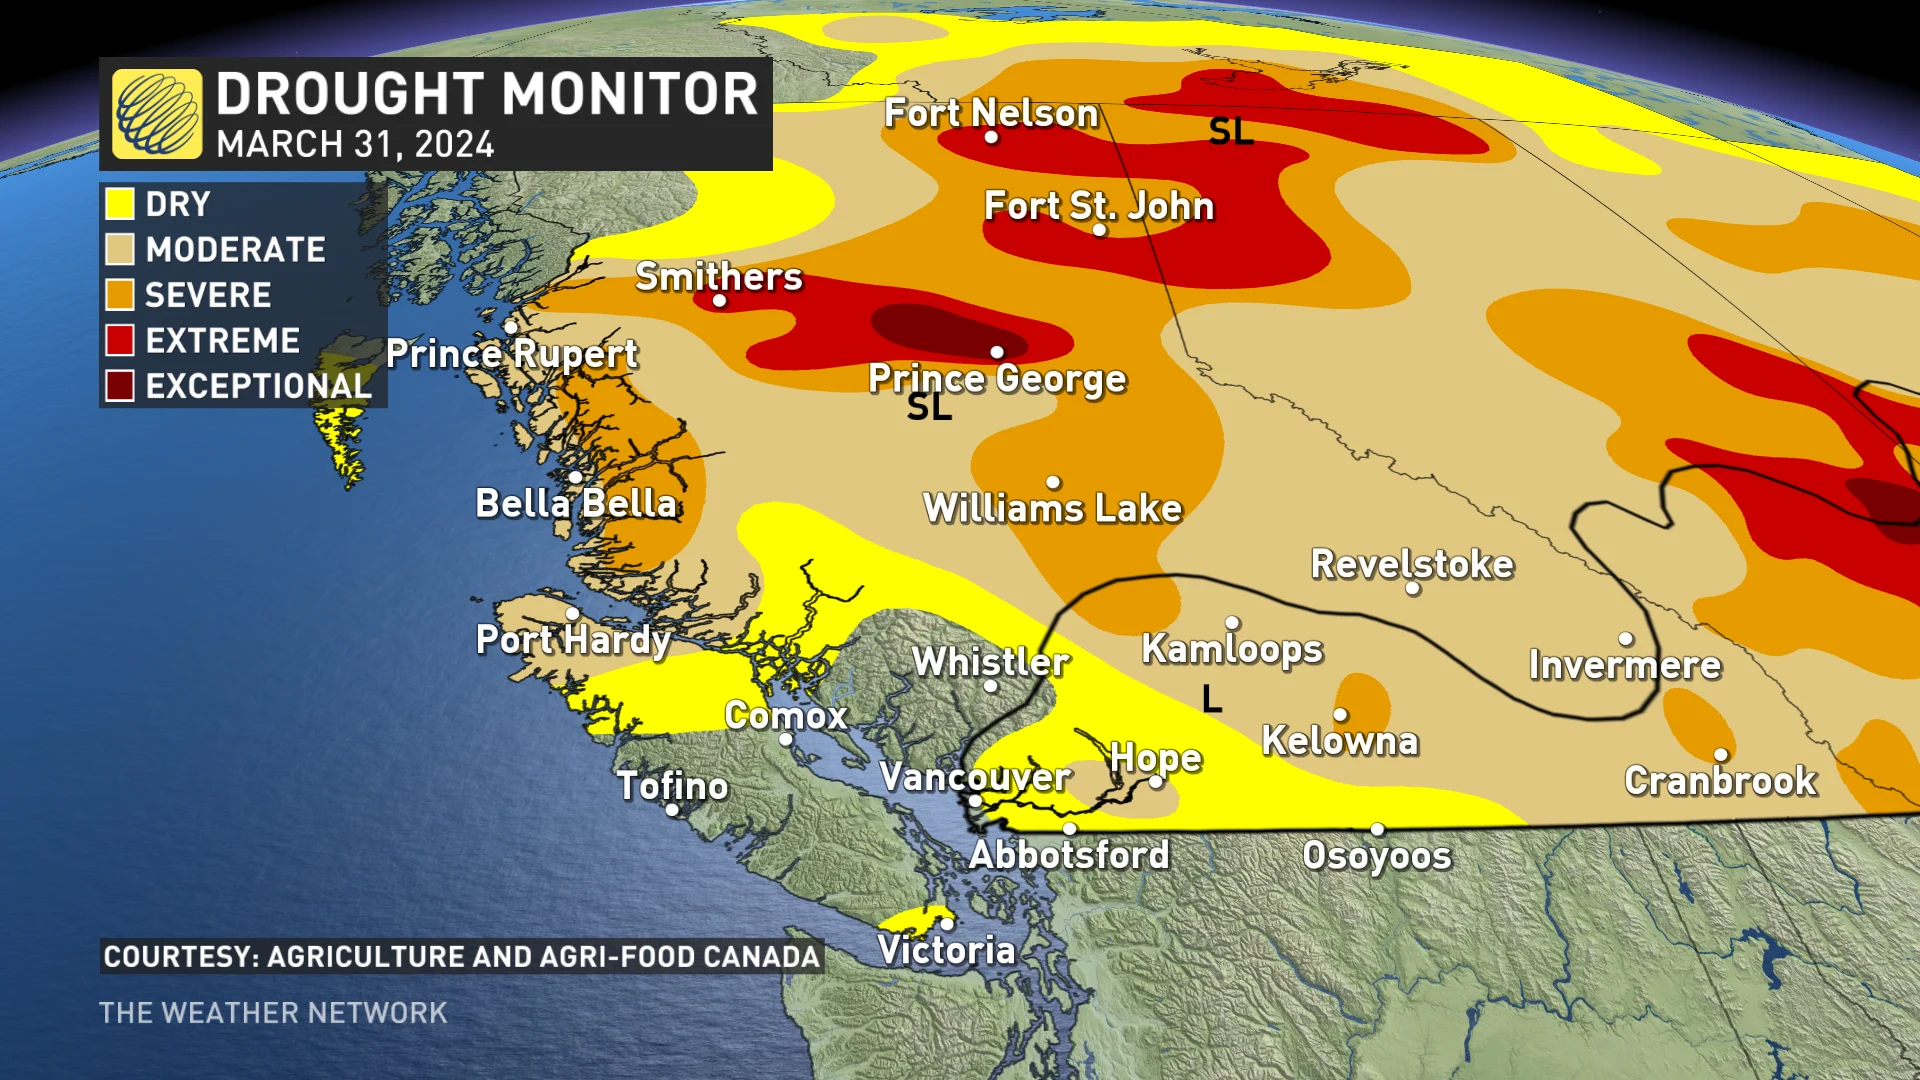 B.C. Drought Monitor as of March 31, 2024. (Uploaded April 11, 2024)